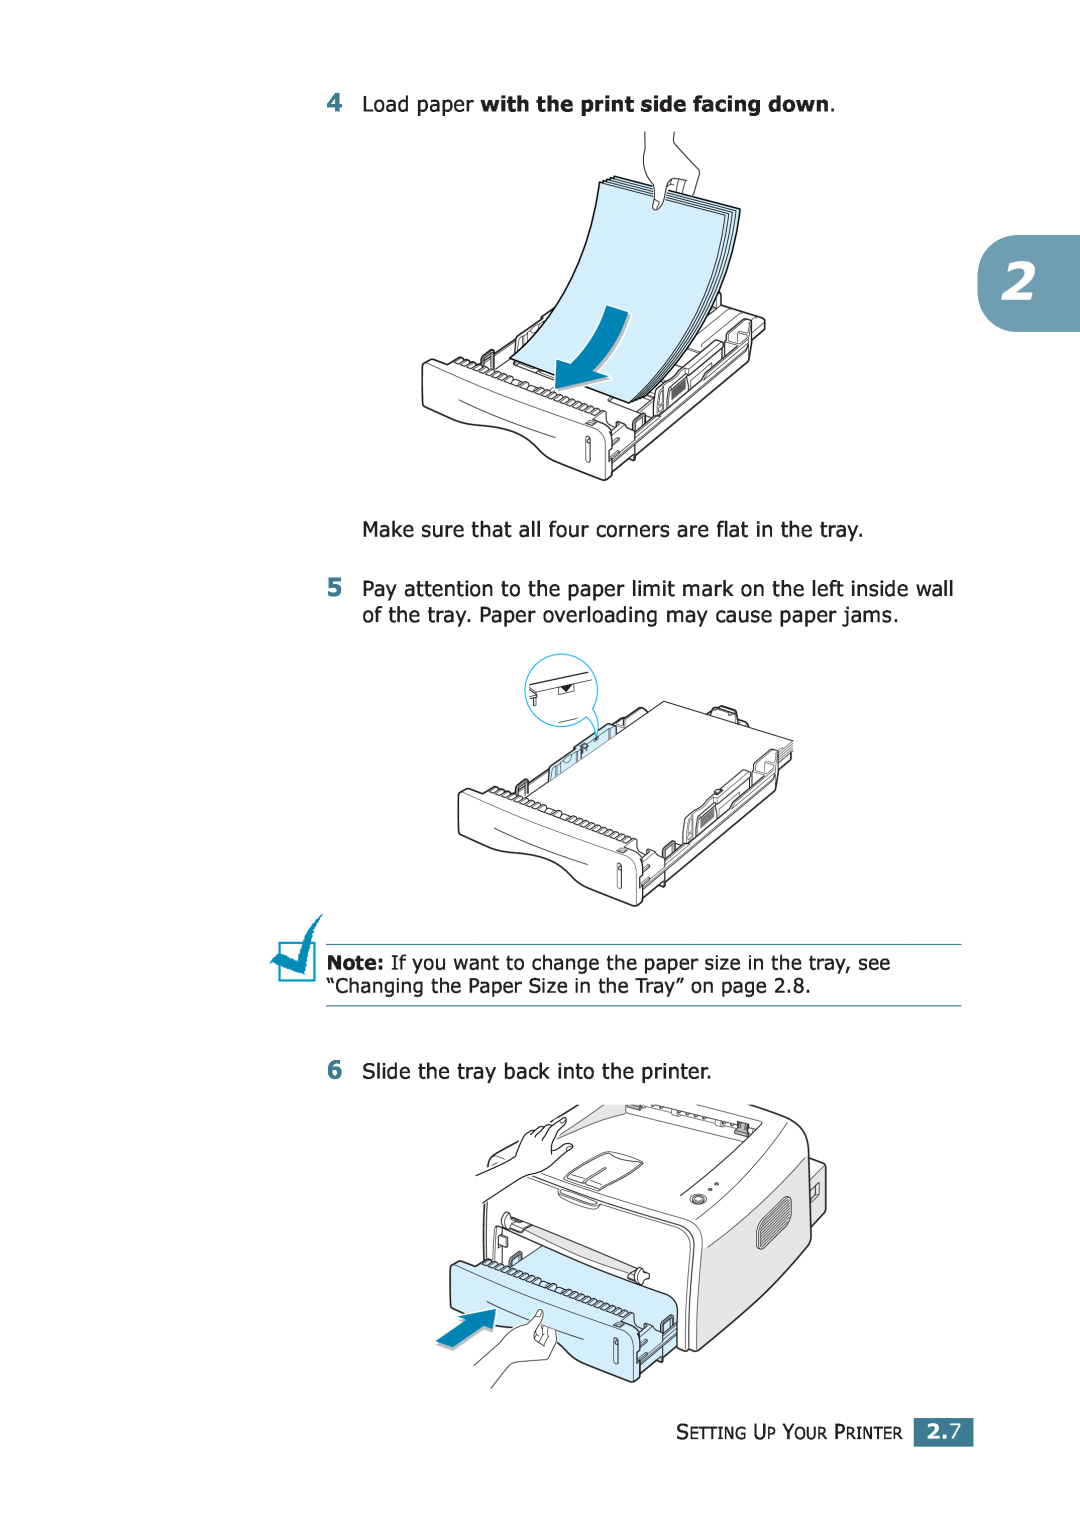 Samsung ML-1710P manual Load paper with the print side facing down, Make sure that all four corners are flat in the tray 